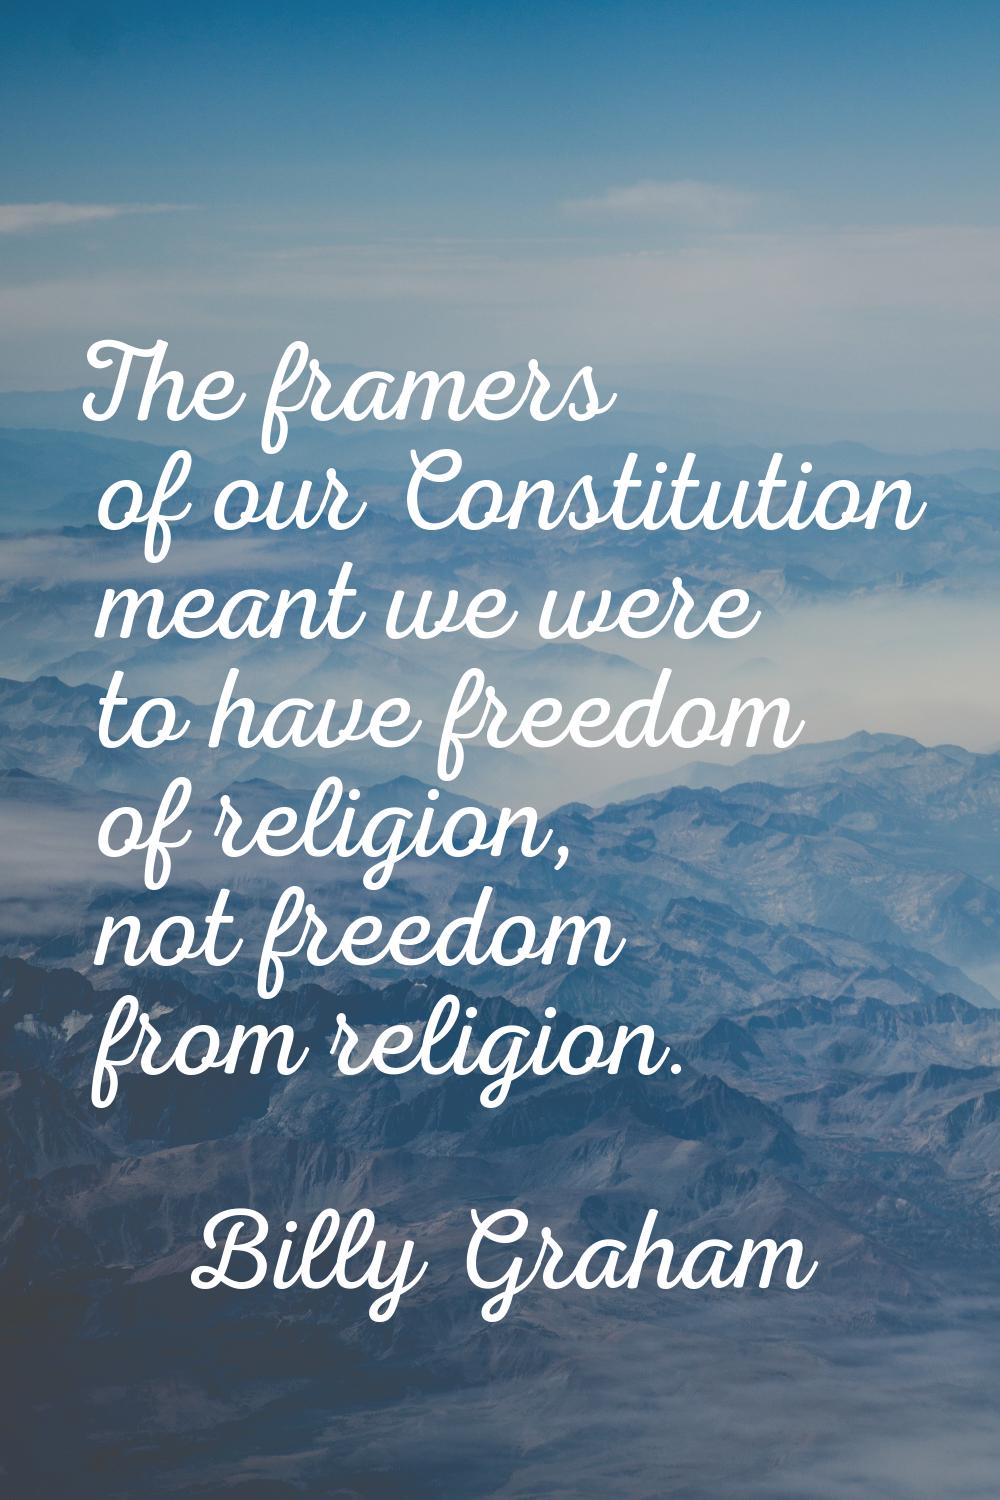 The framers of our Constitution meant we were to have freedom of religion, not freedom from religio